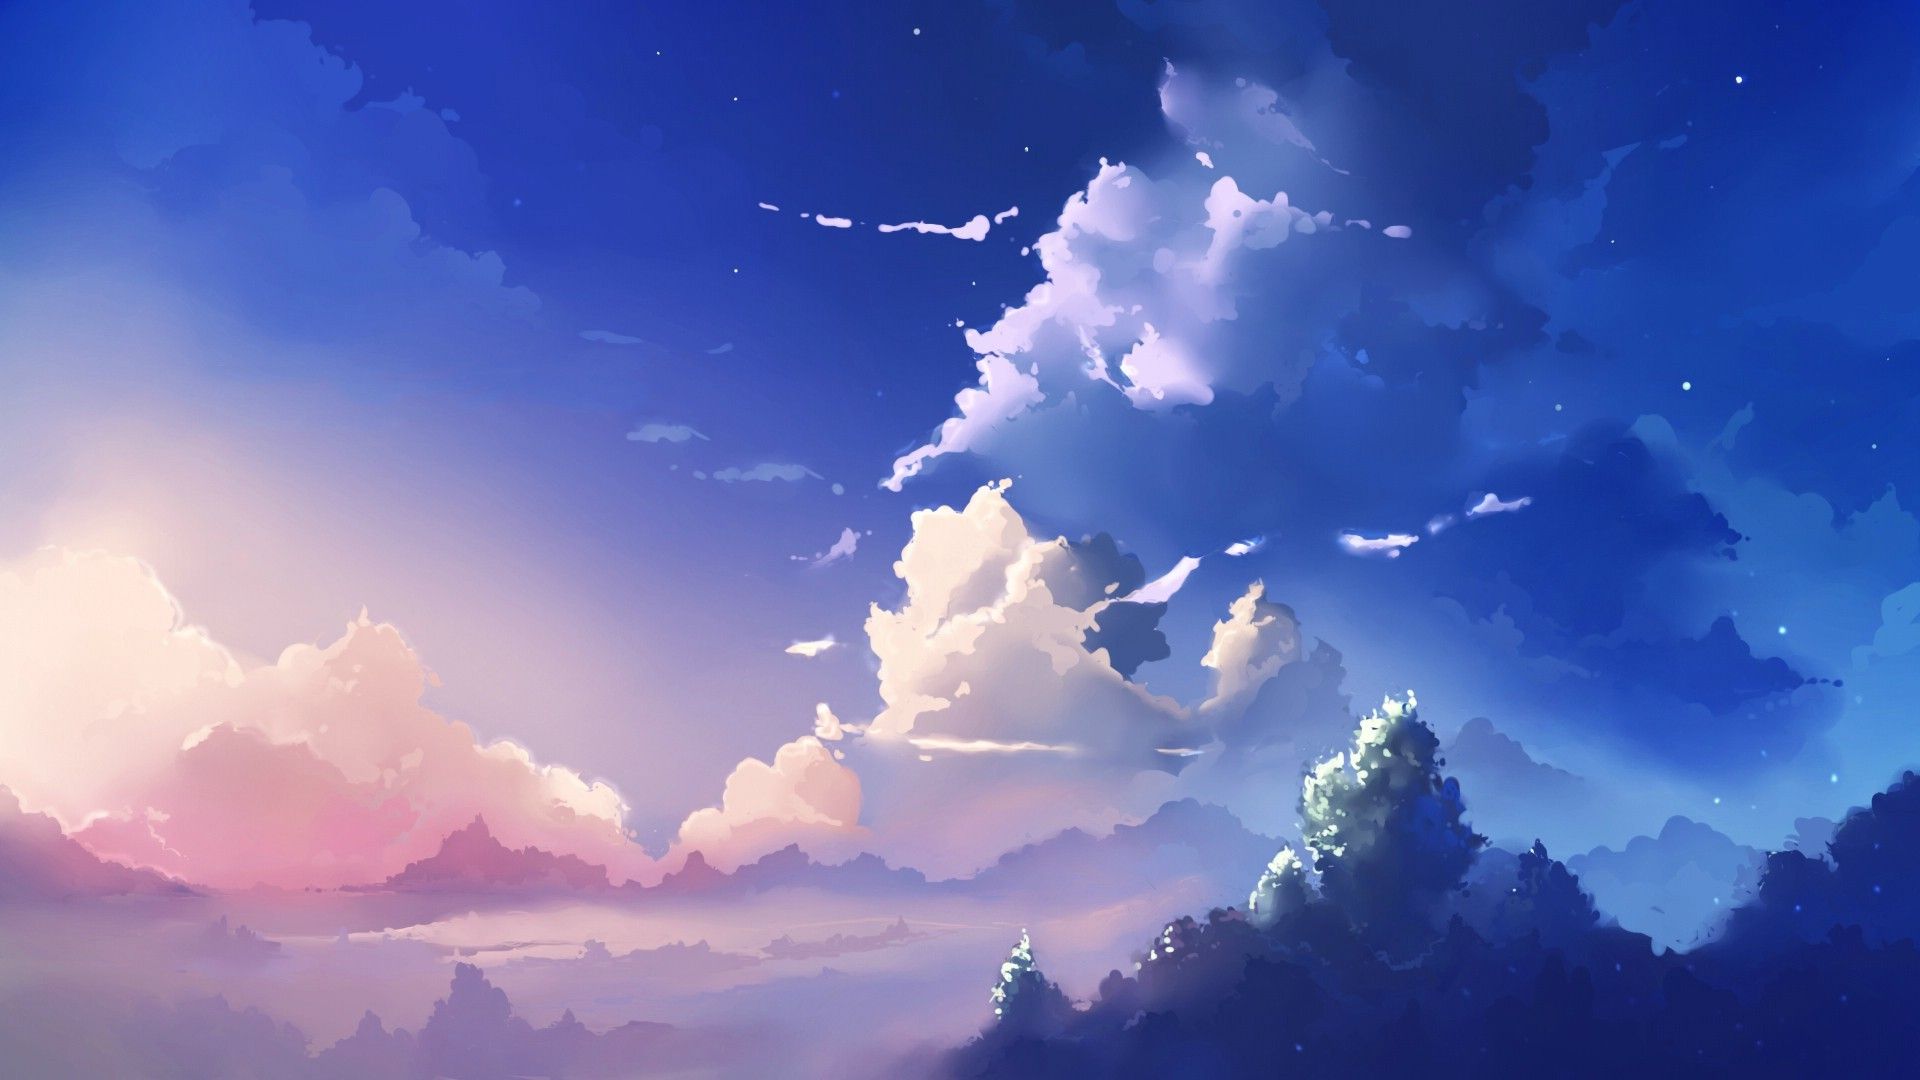 Awesome Anime Scenery Wallpaper 7968 1920 x 1080 WallpaperLayer